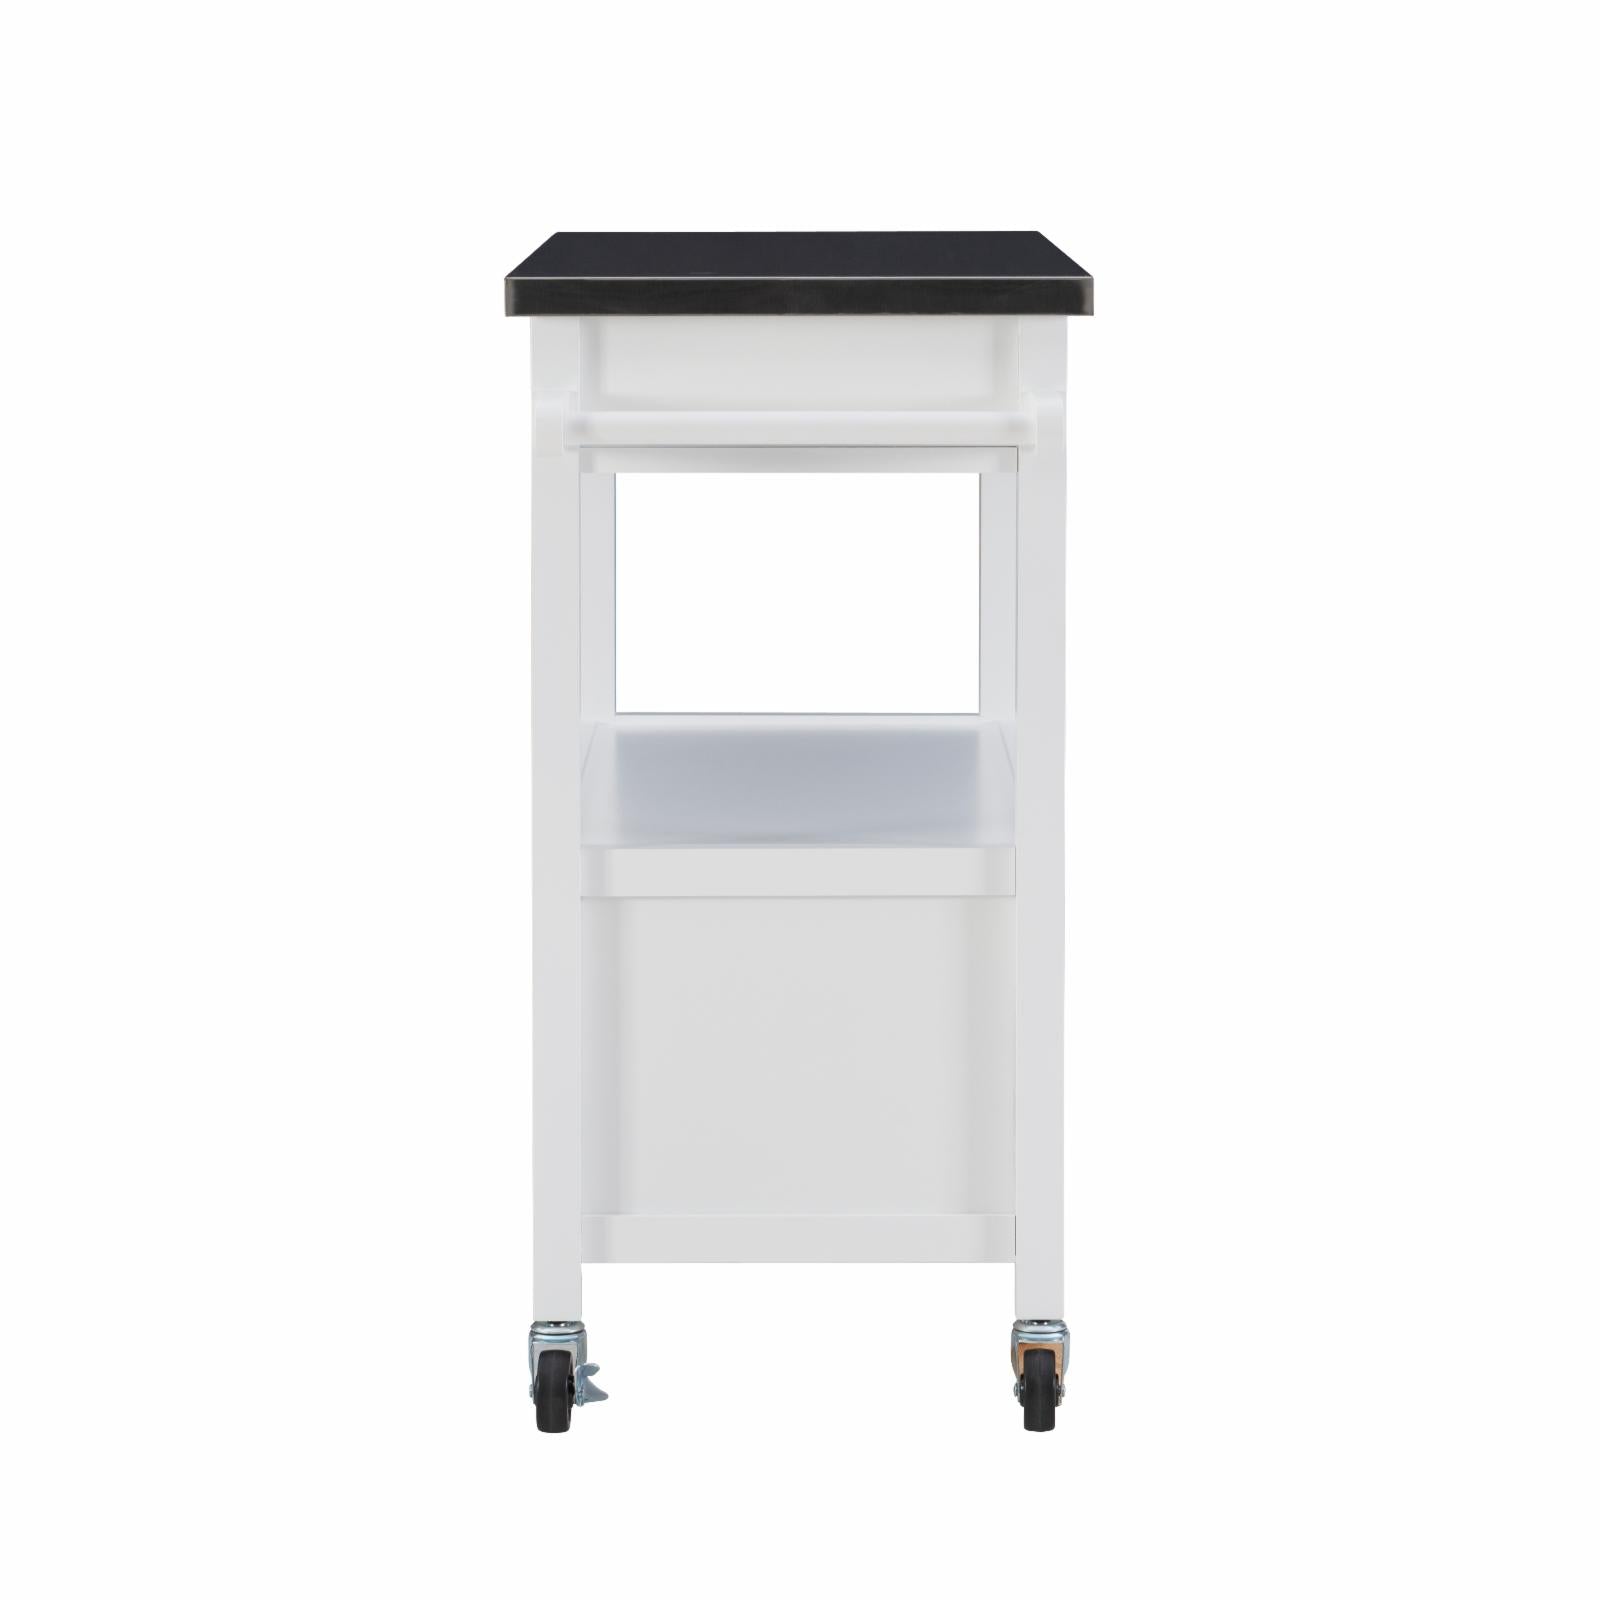 Linon Sydney 3-Drawer MobileKitchen Cart with Stainless Steel Top - White